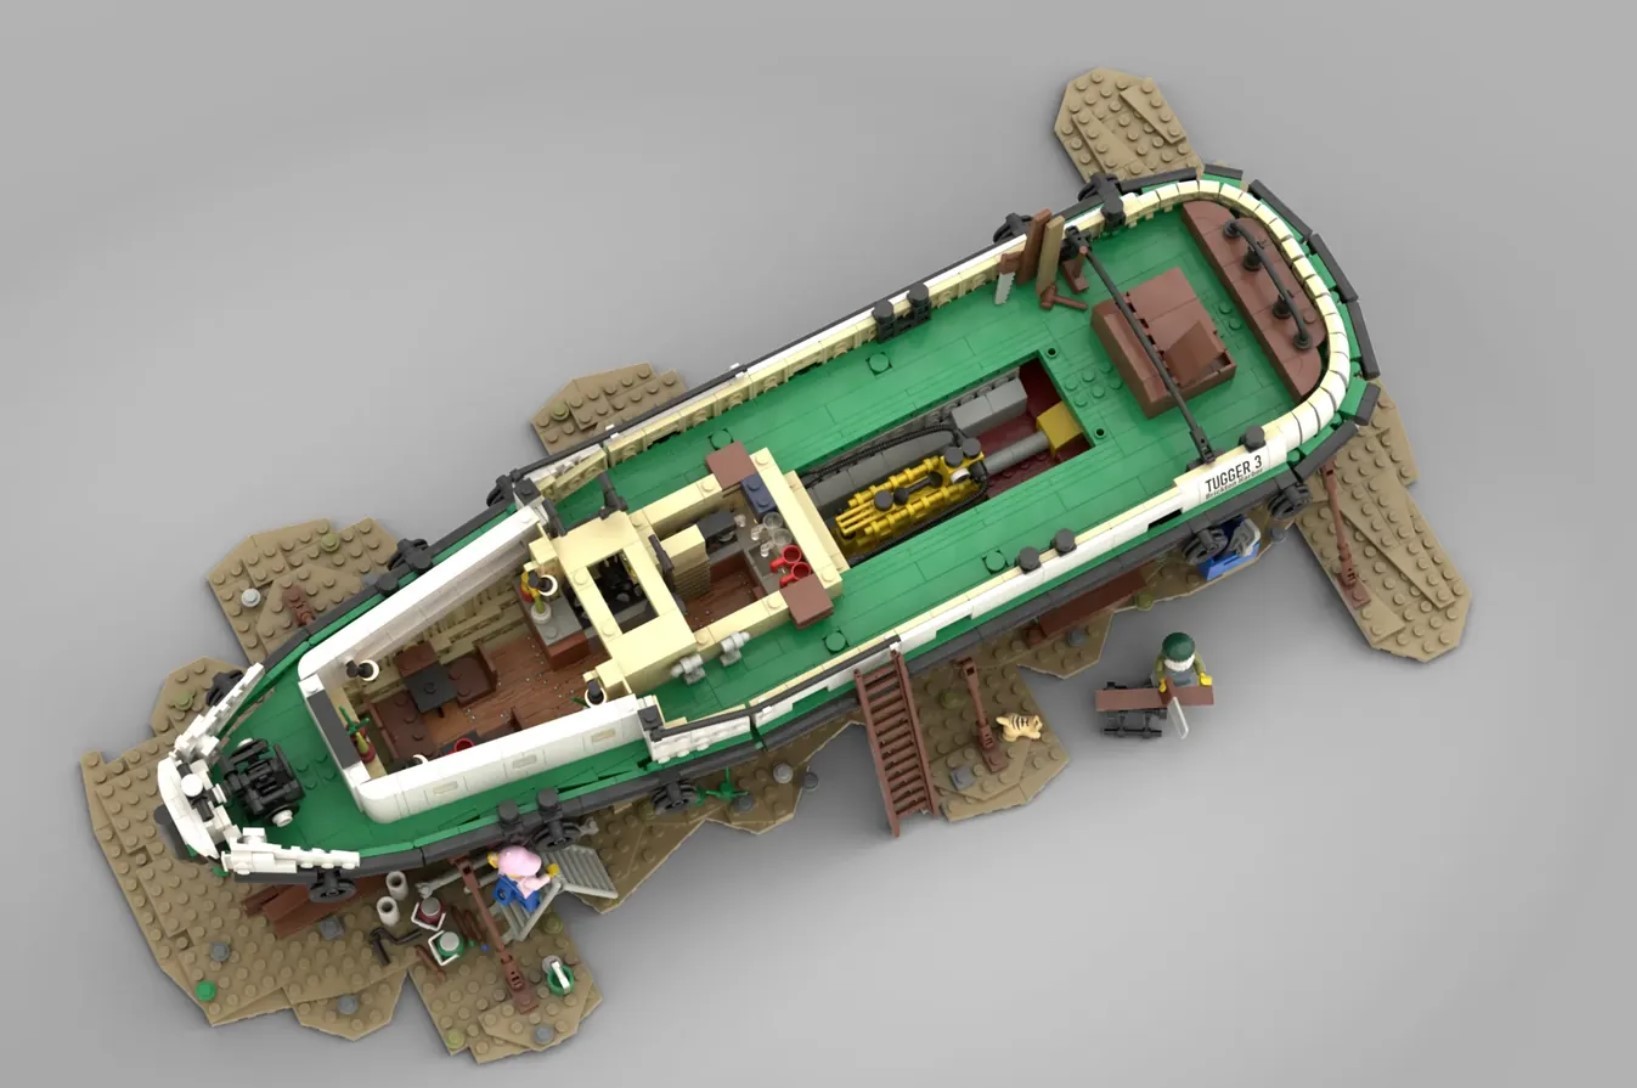 LEGO Ideas Tugboat Will Let You Live Your Sea Dog Dreams - autoevolution